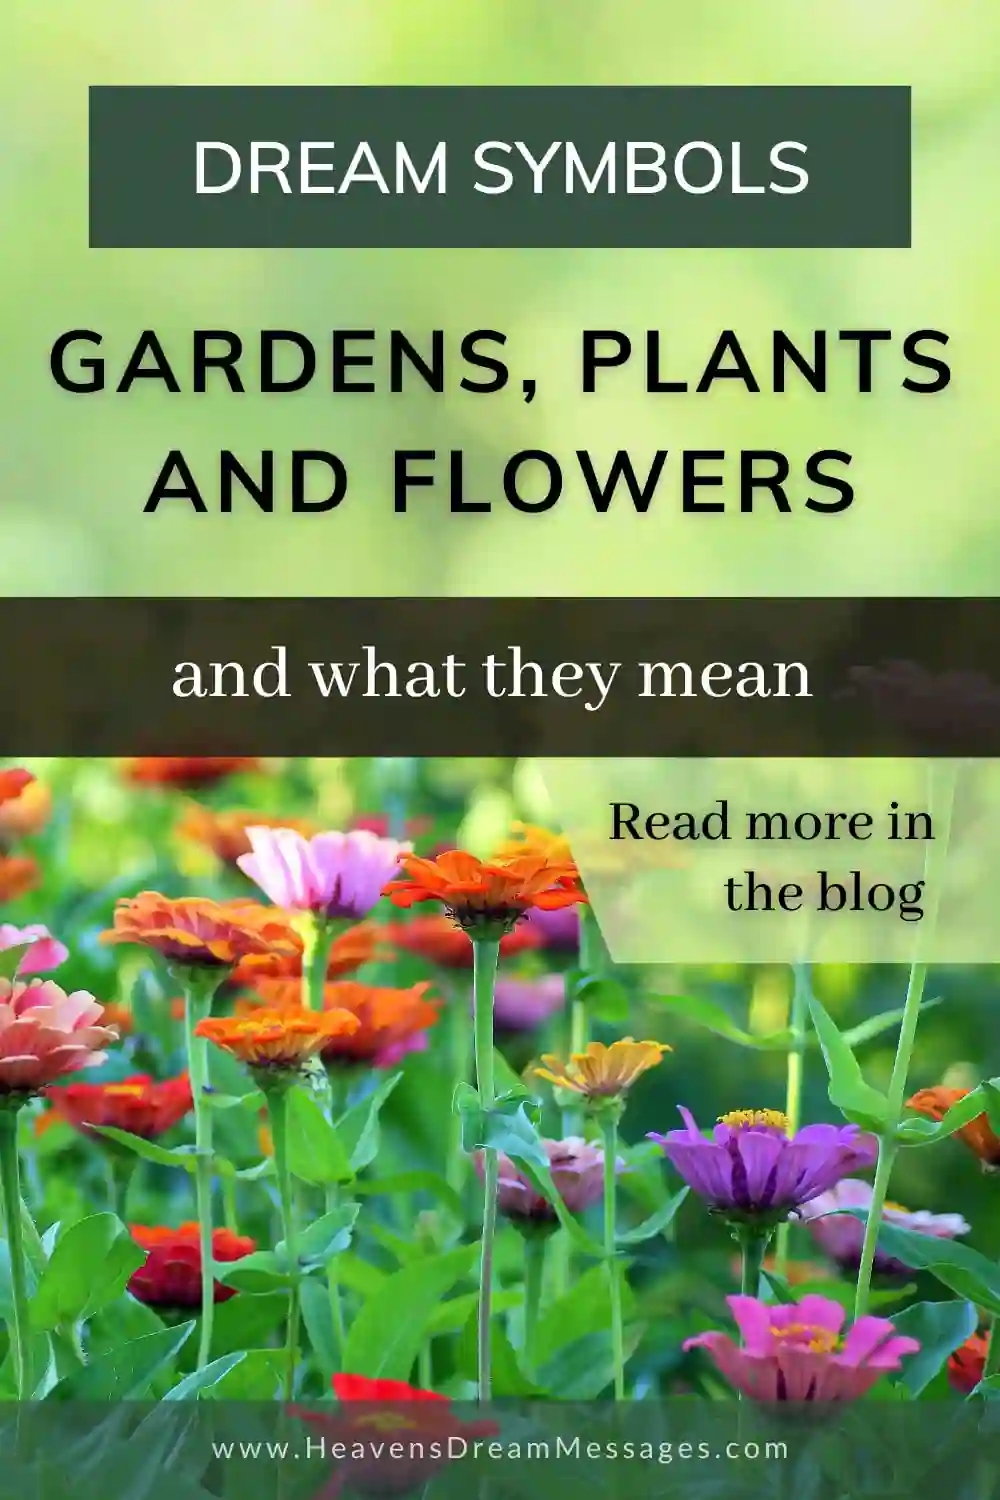 Picture of flowers, with text: Gardens, plants and flowers and what they mean